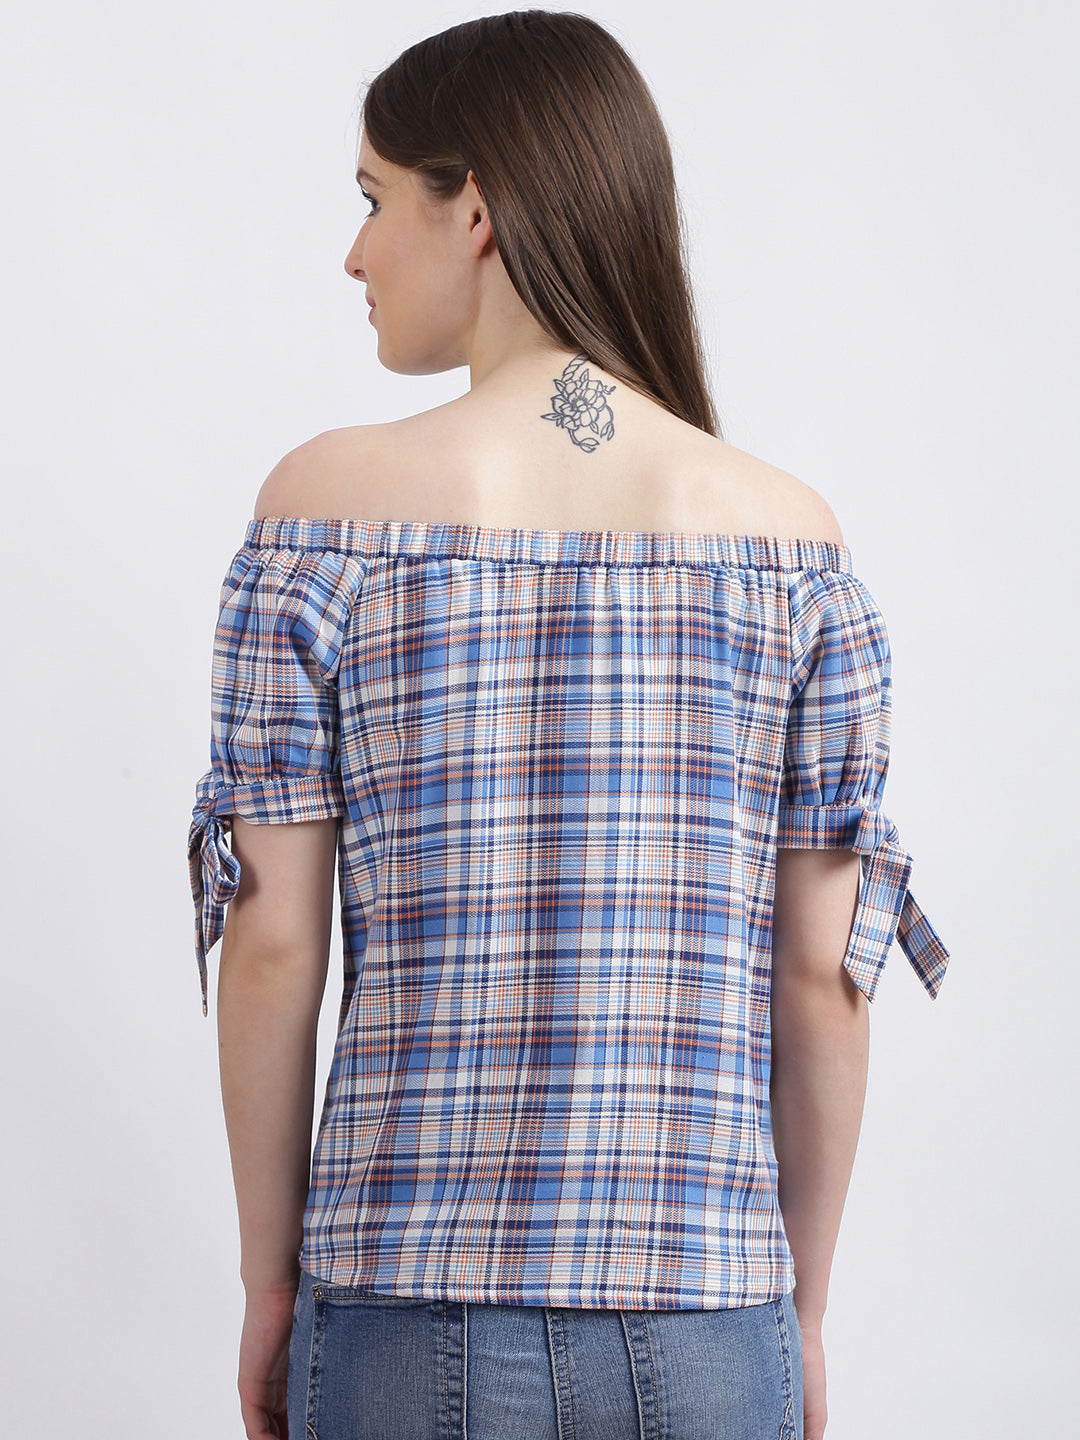 Multi-Colored Checked Regular Top for Women